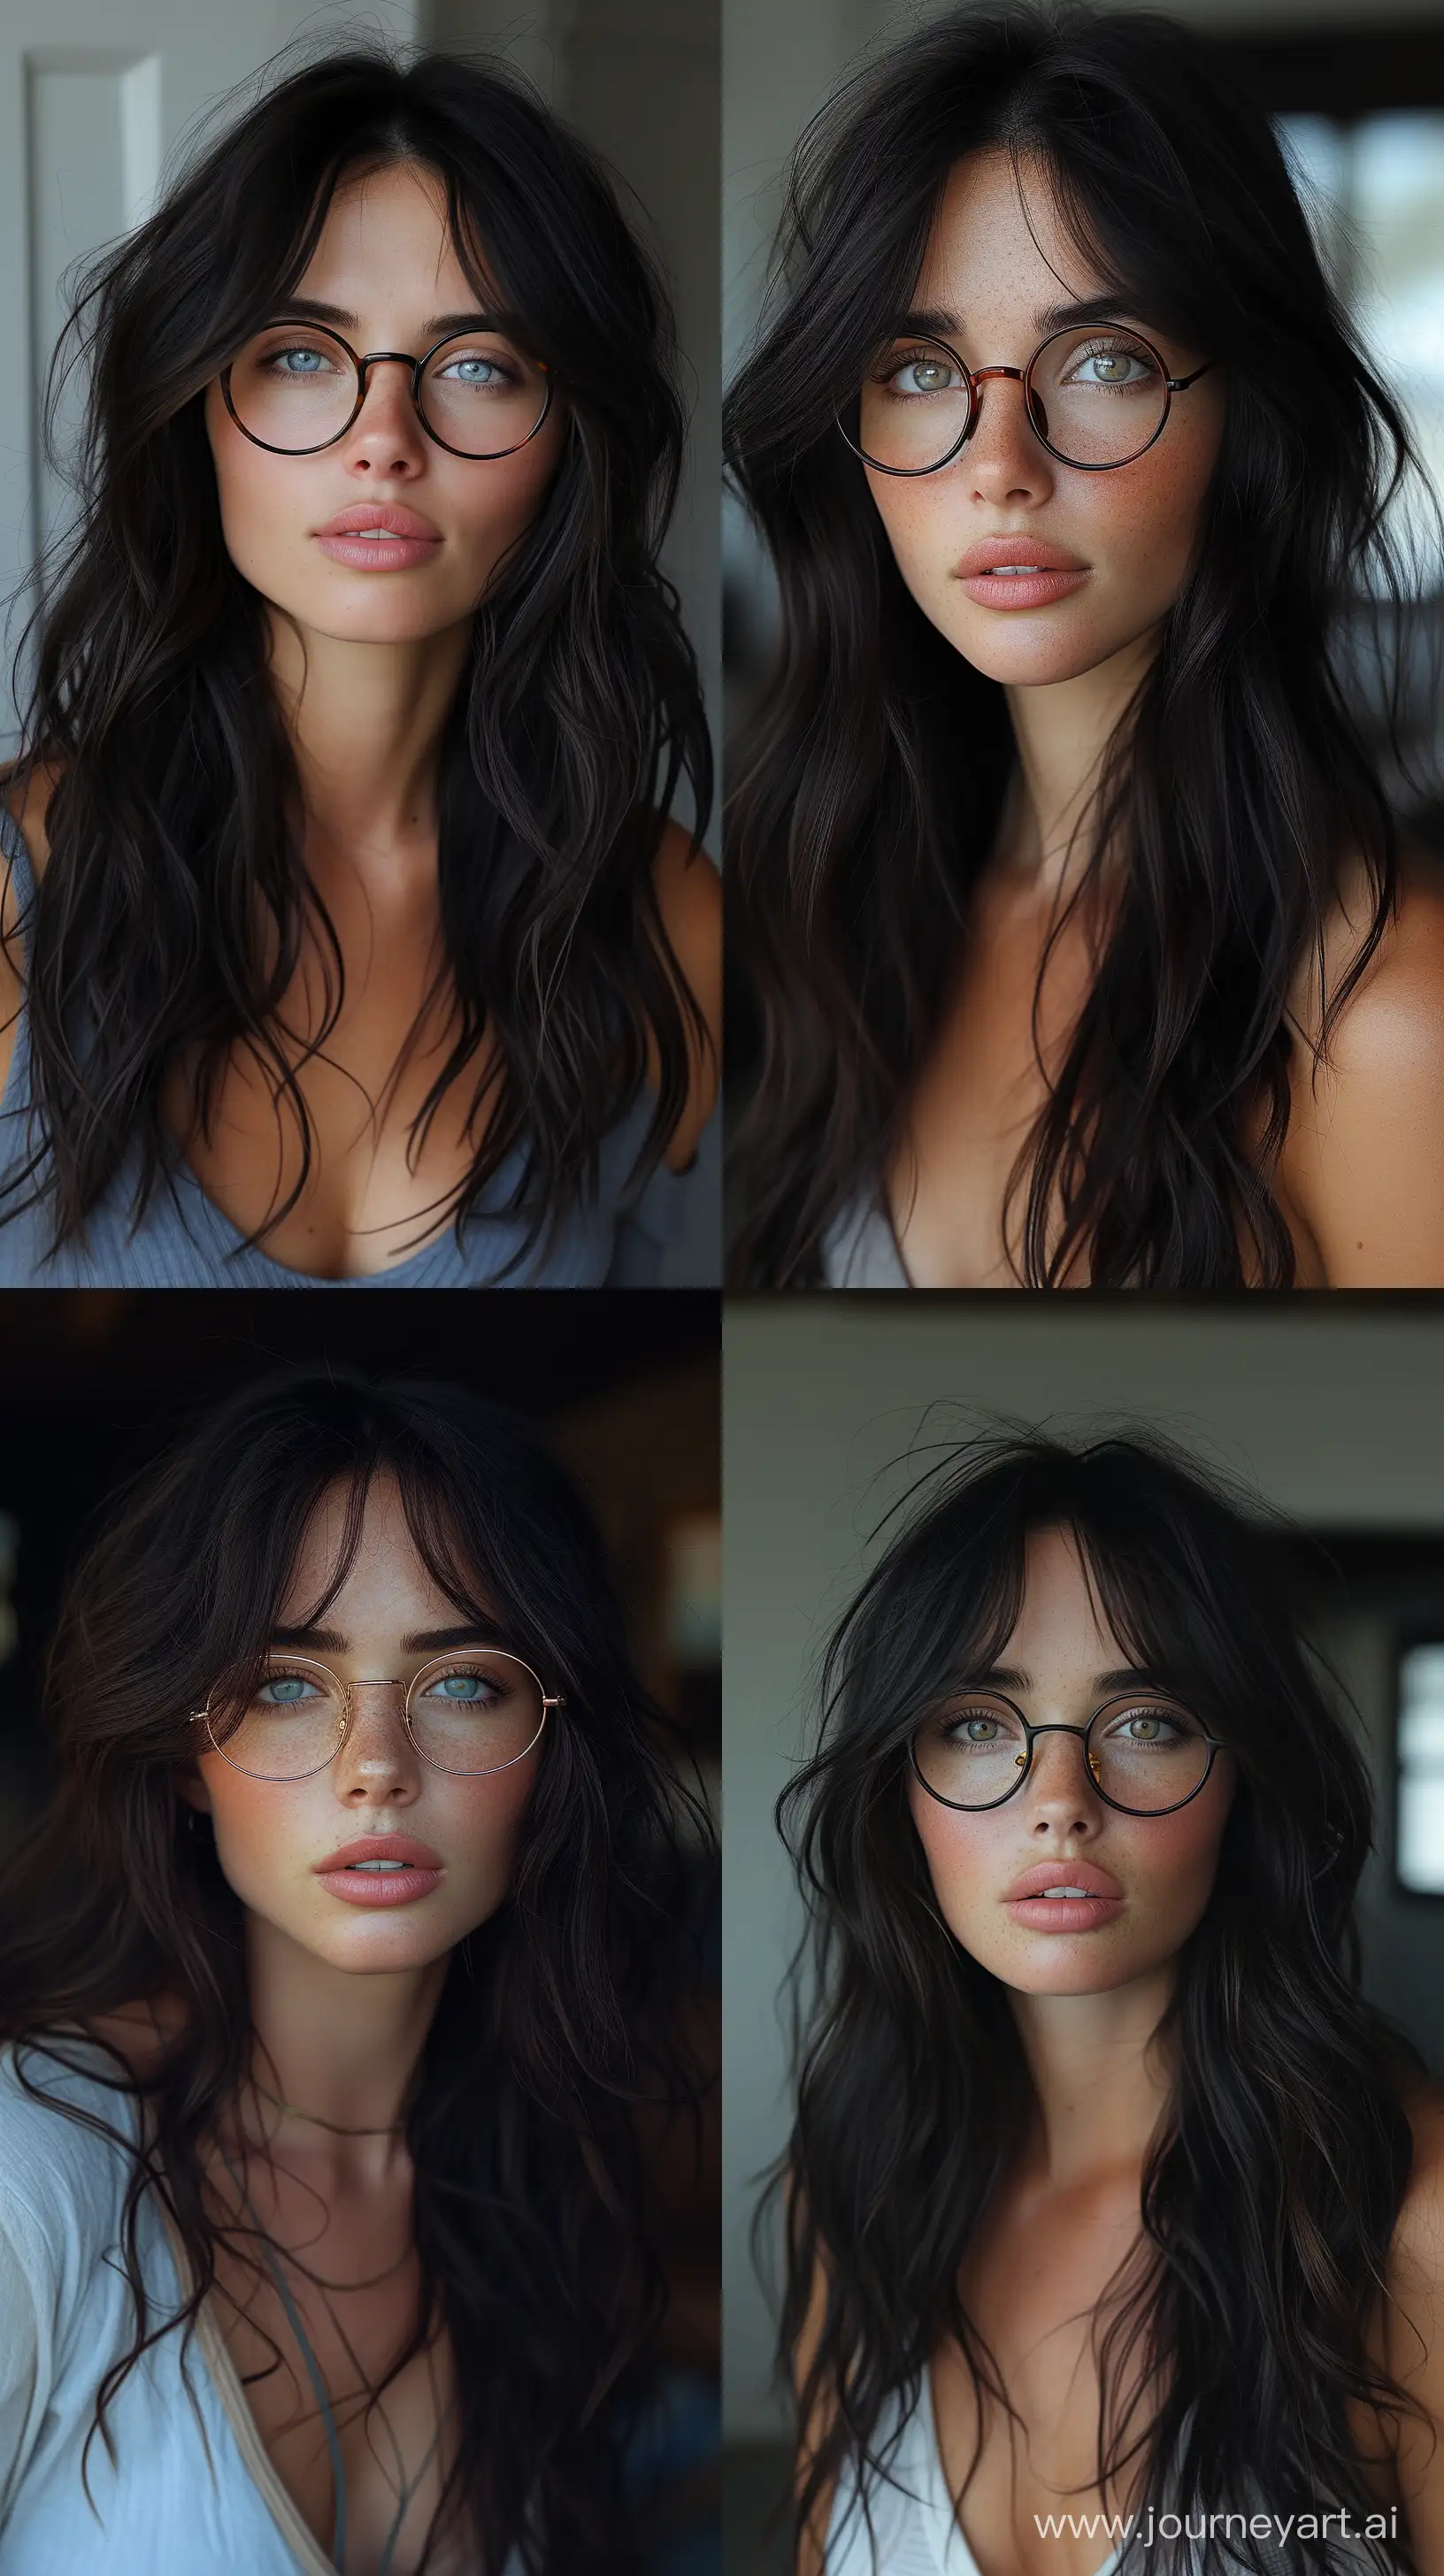 Innocent-Beauty-Stunning-26YearOld-Woman-with-Long-Wavy-Hair-and-Nerd-Glasses